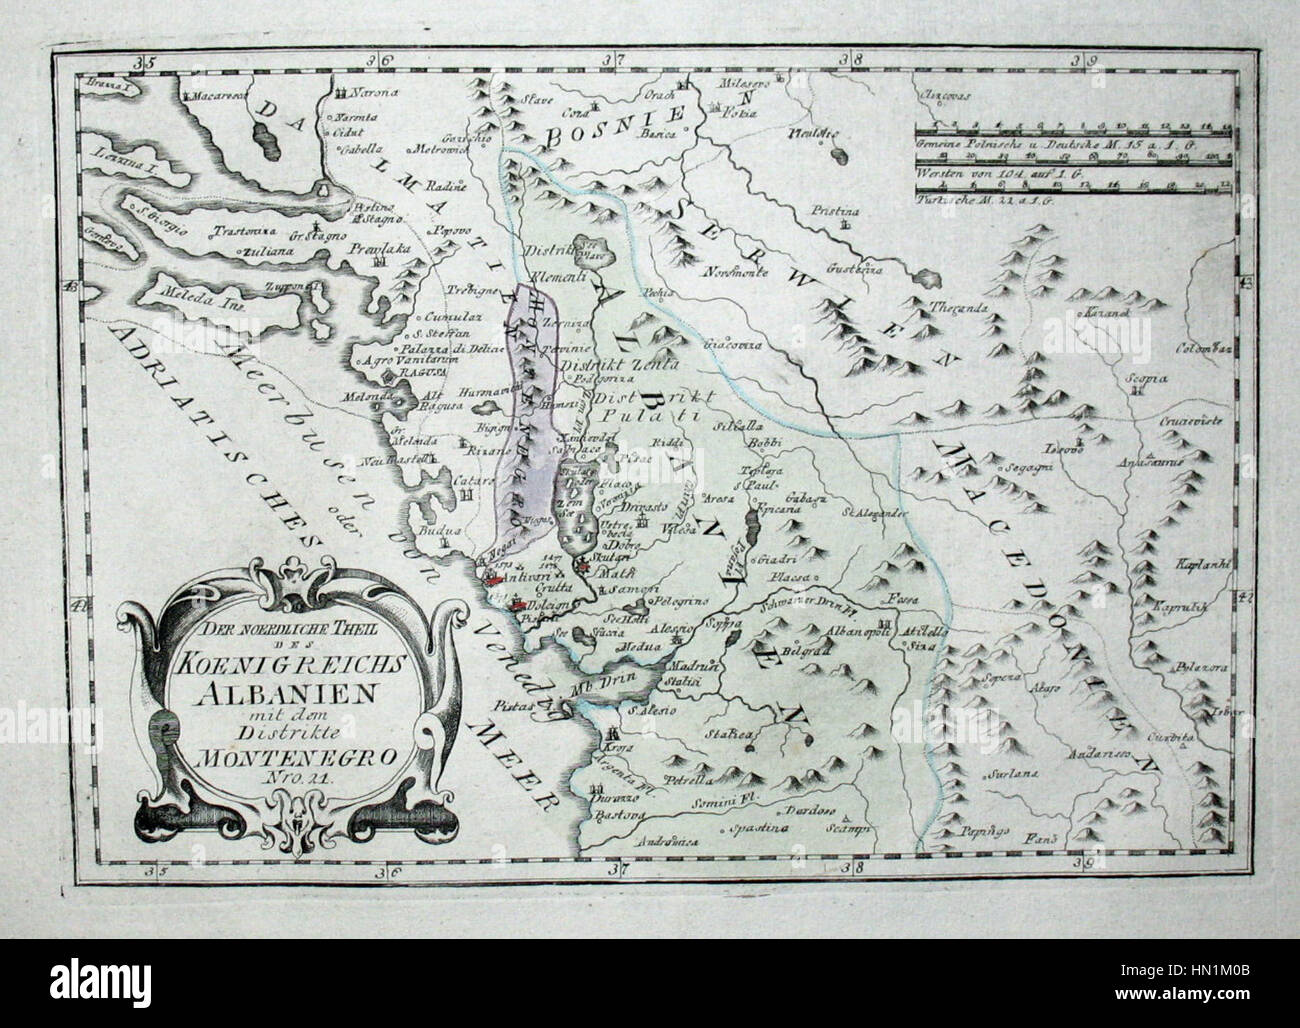 Map of Albania in 1791 by Reilly 021 Stock Photo